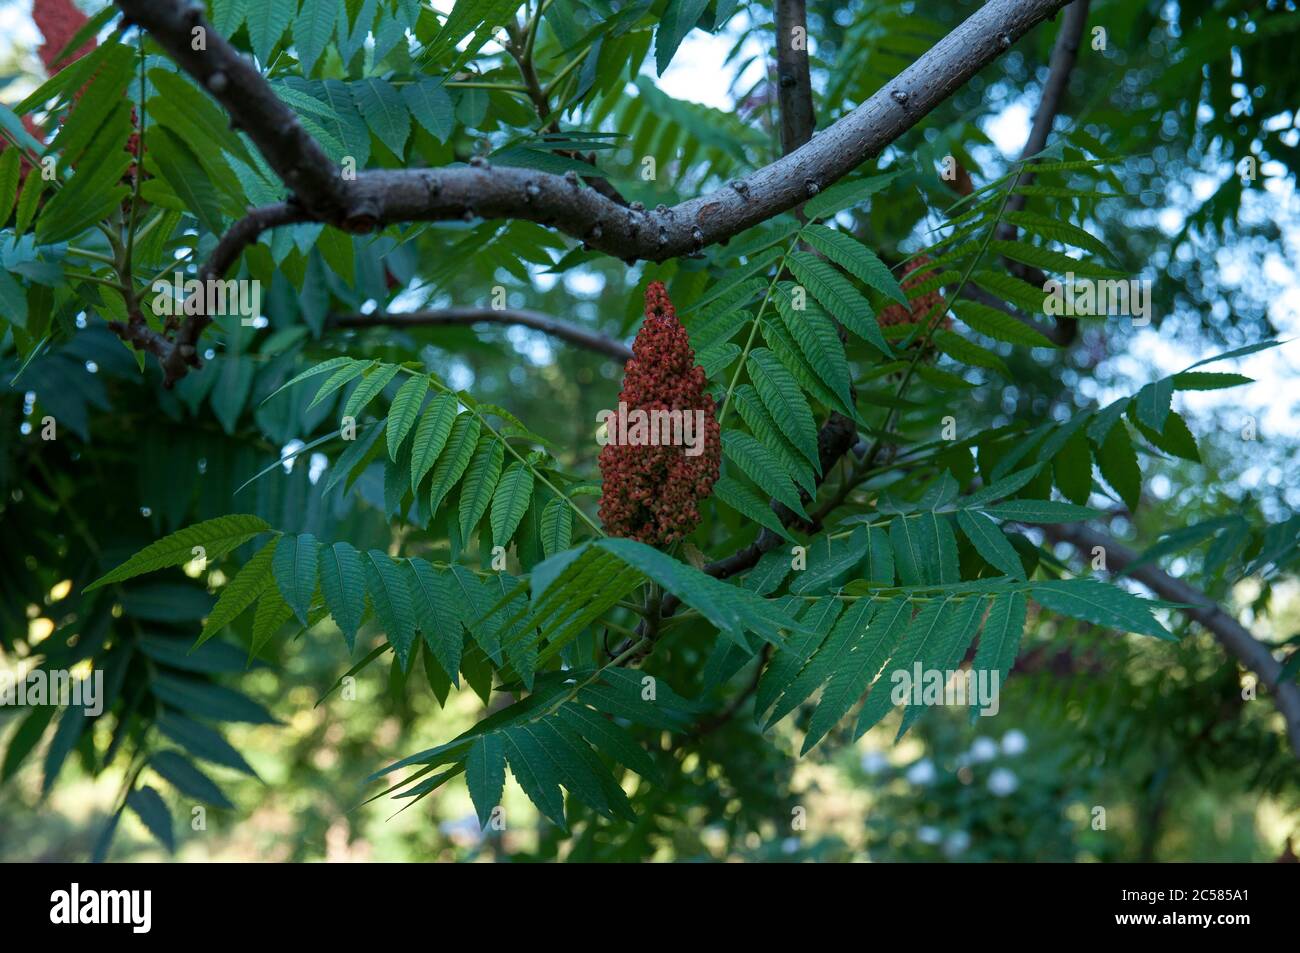 Staghorn sumac, Ornamental plant sumac deer horn - vinegar tree. Flowering of the decorative sumac tree. Cone-shaped panicles of red-brown flowers of Stock Photo